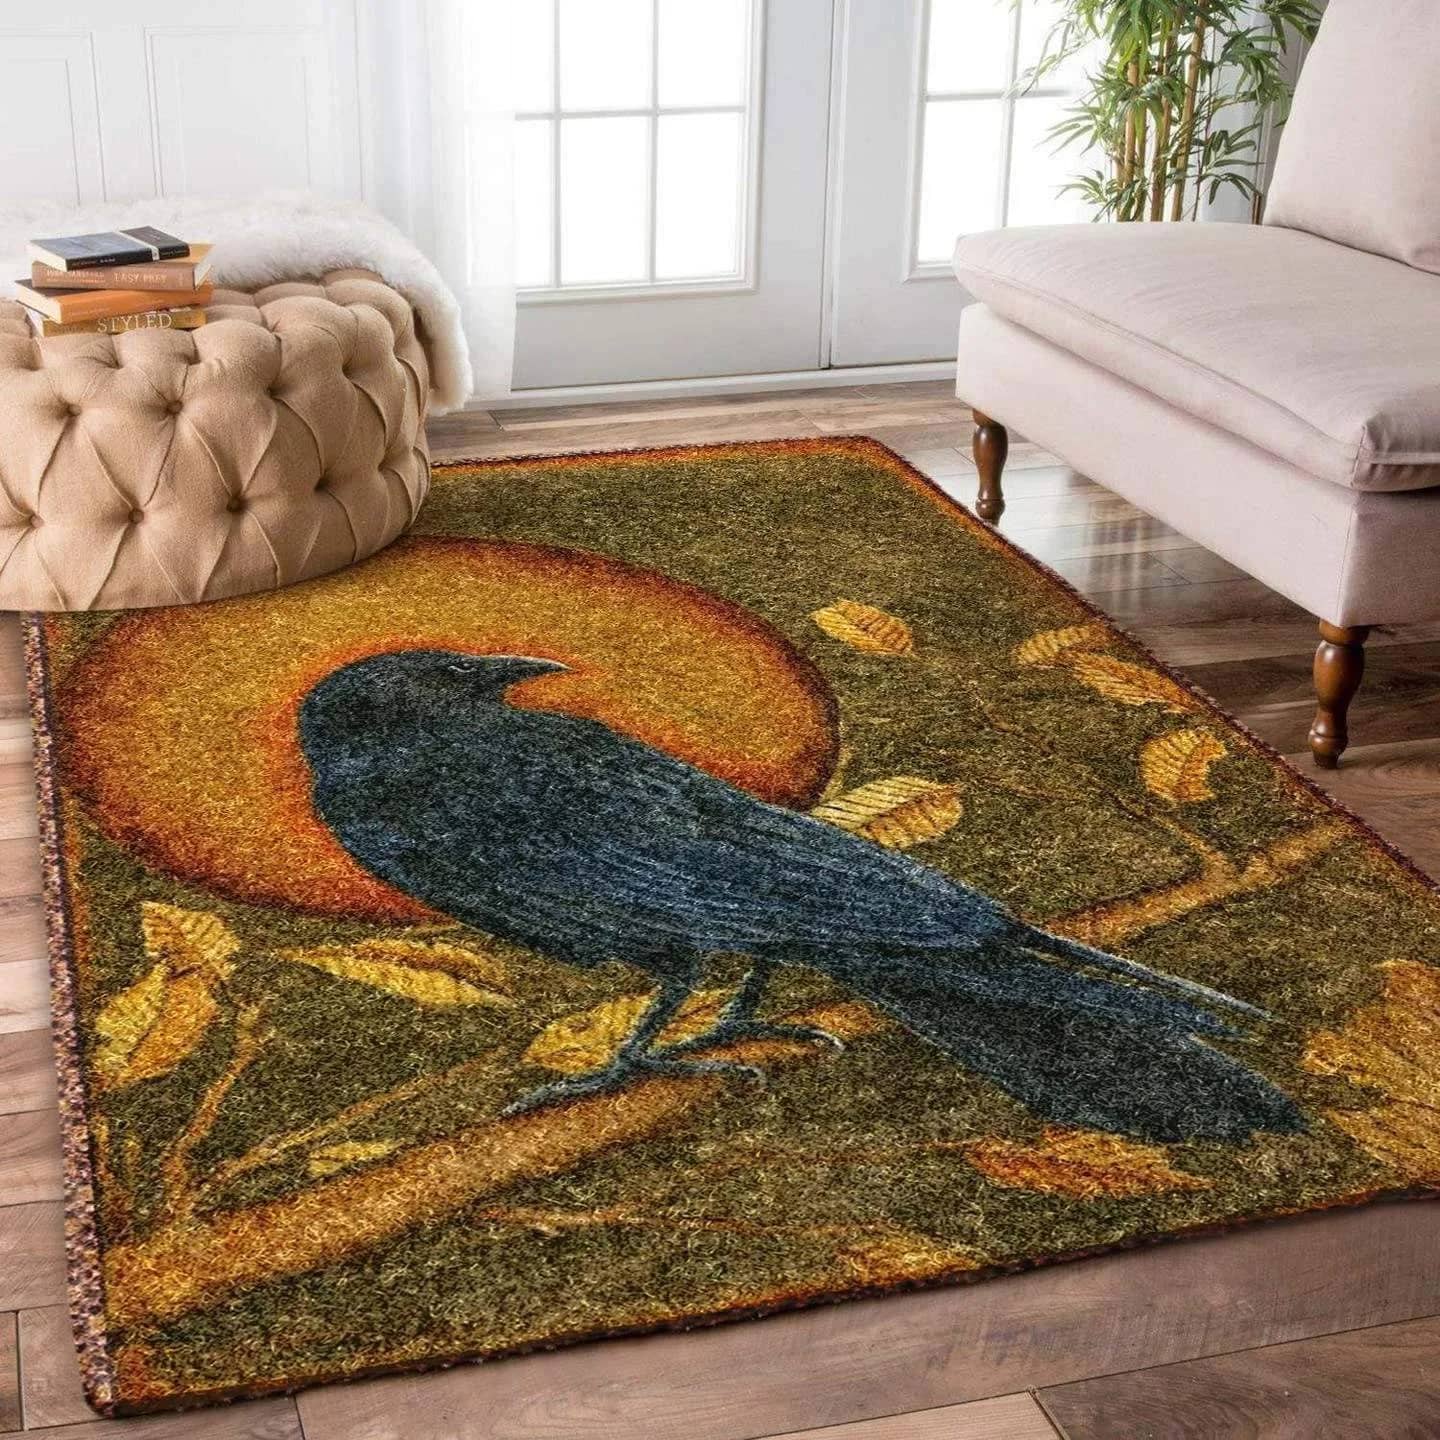 Crow Limited Edition Amazon Best Seller Sku 262122 Rug